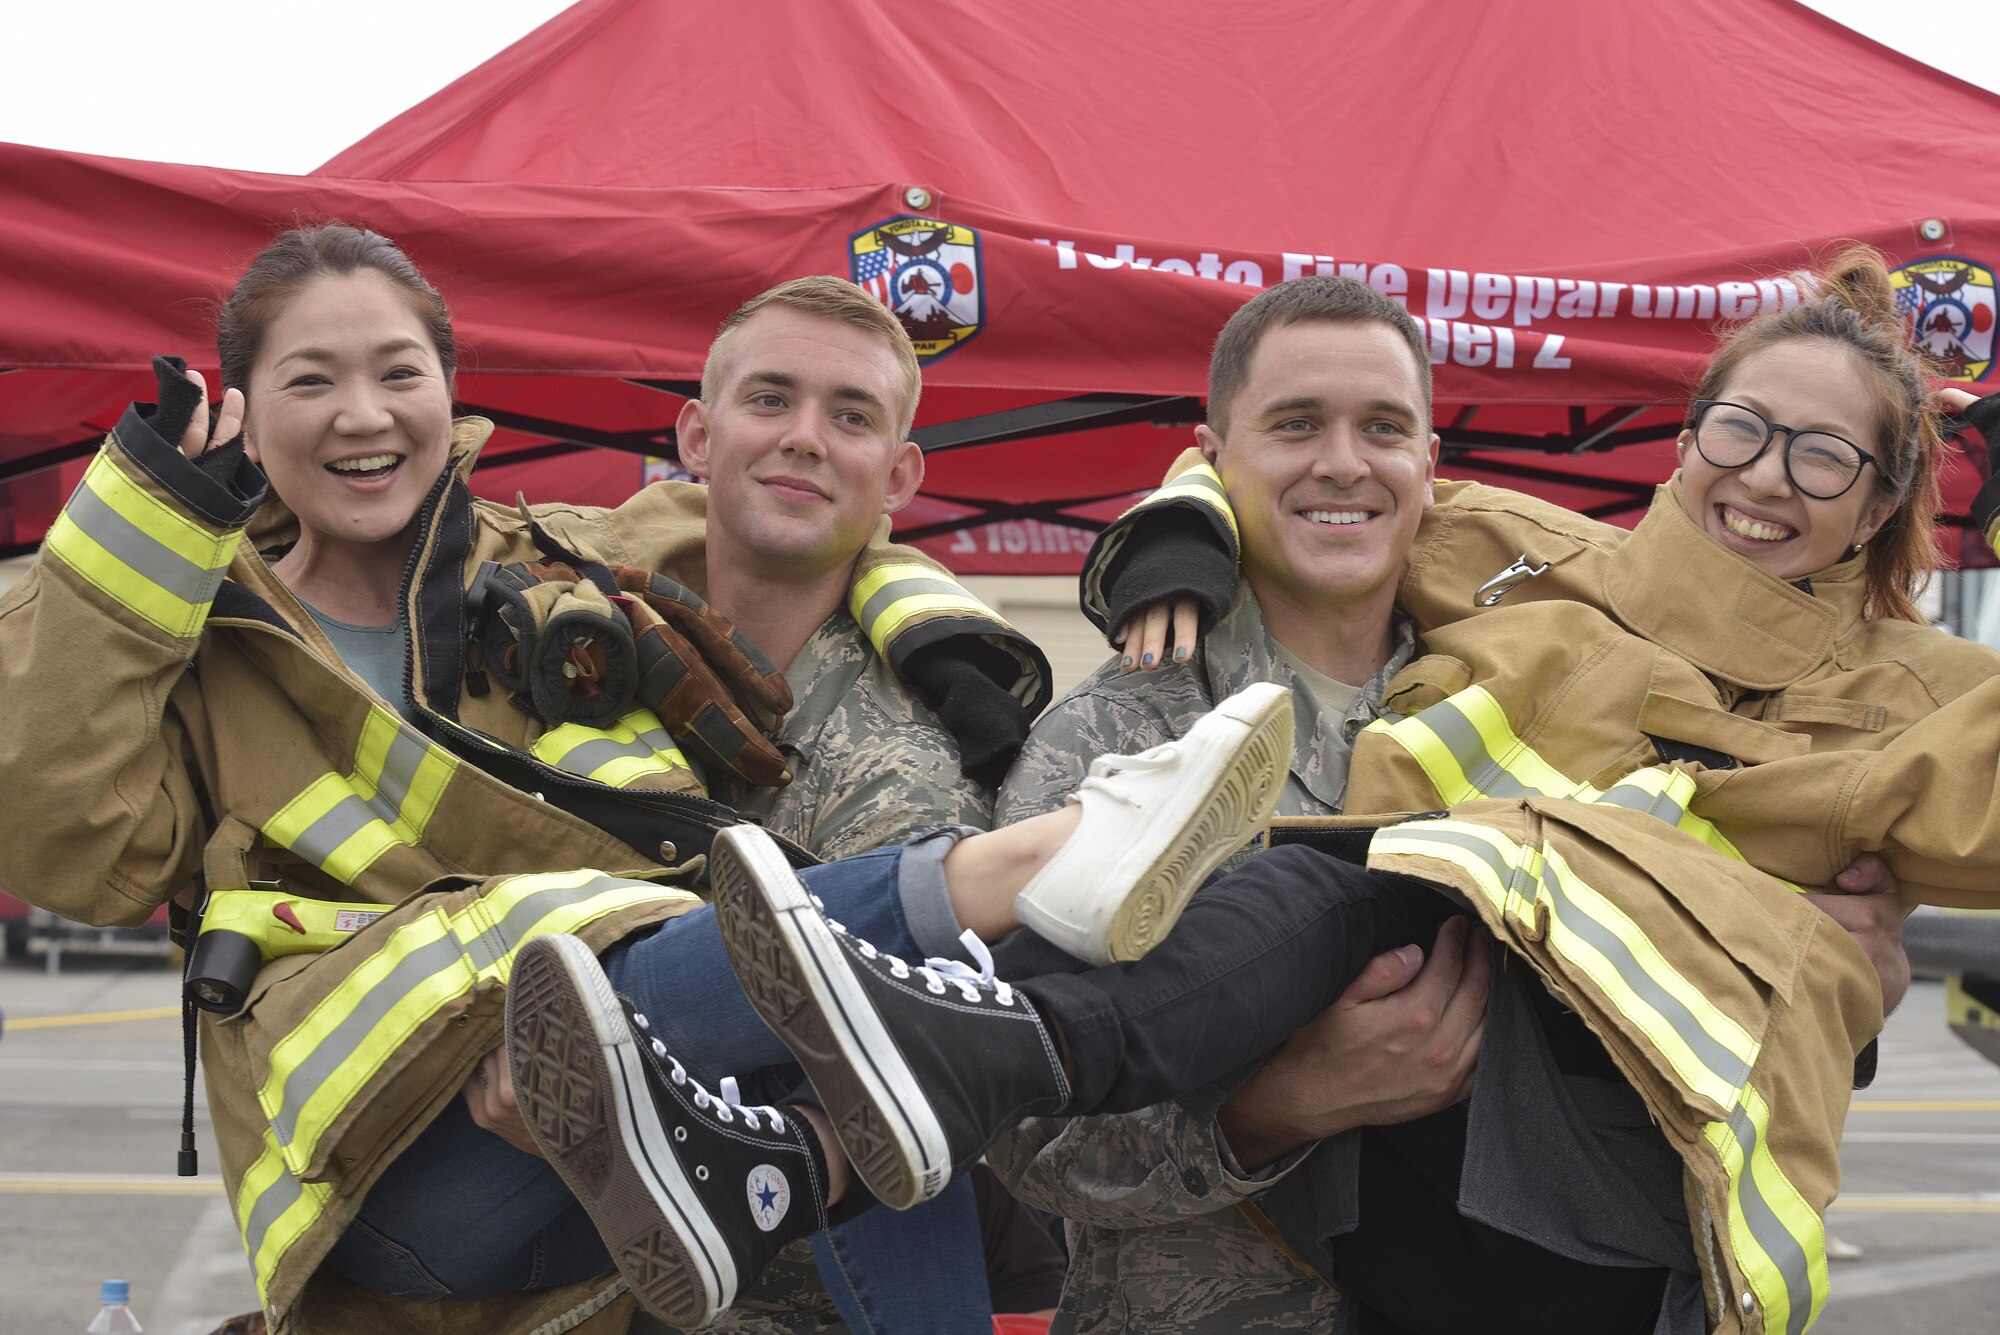 (Right to left) Staff Sgt. Bryan Schroeder and Senior Airman Thomas Smith, both from the 374th Civil Engineer Squadron fire department, pose for a photo with Japanese festivalgoers during the 2016 Friendship Festival at Yokota Air Base, Japan, Sept. 18, 2016. The festival hosted food vendors, static aircraft displays, live entertainment and military and government demonstrations. (U.S. Air Force photo by Machiko Imai/Released)